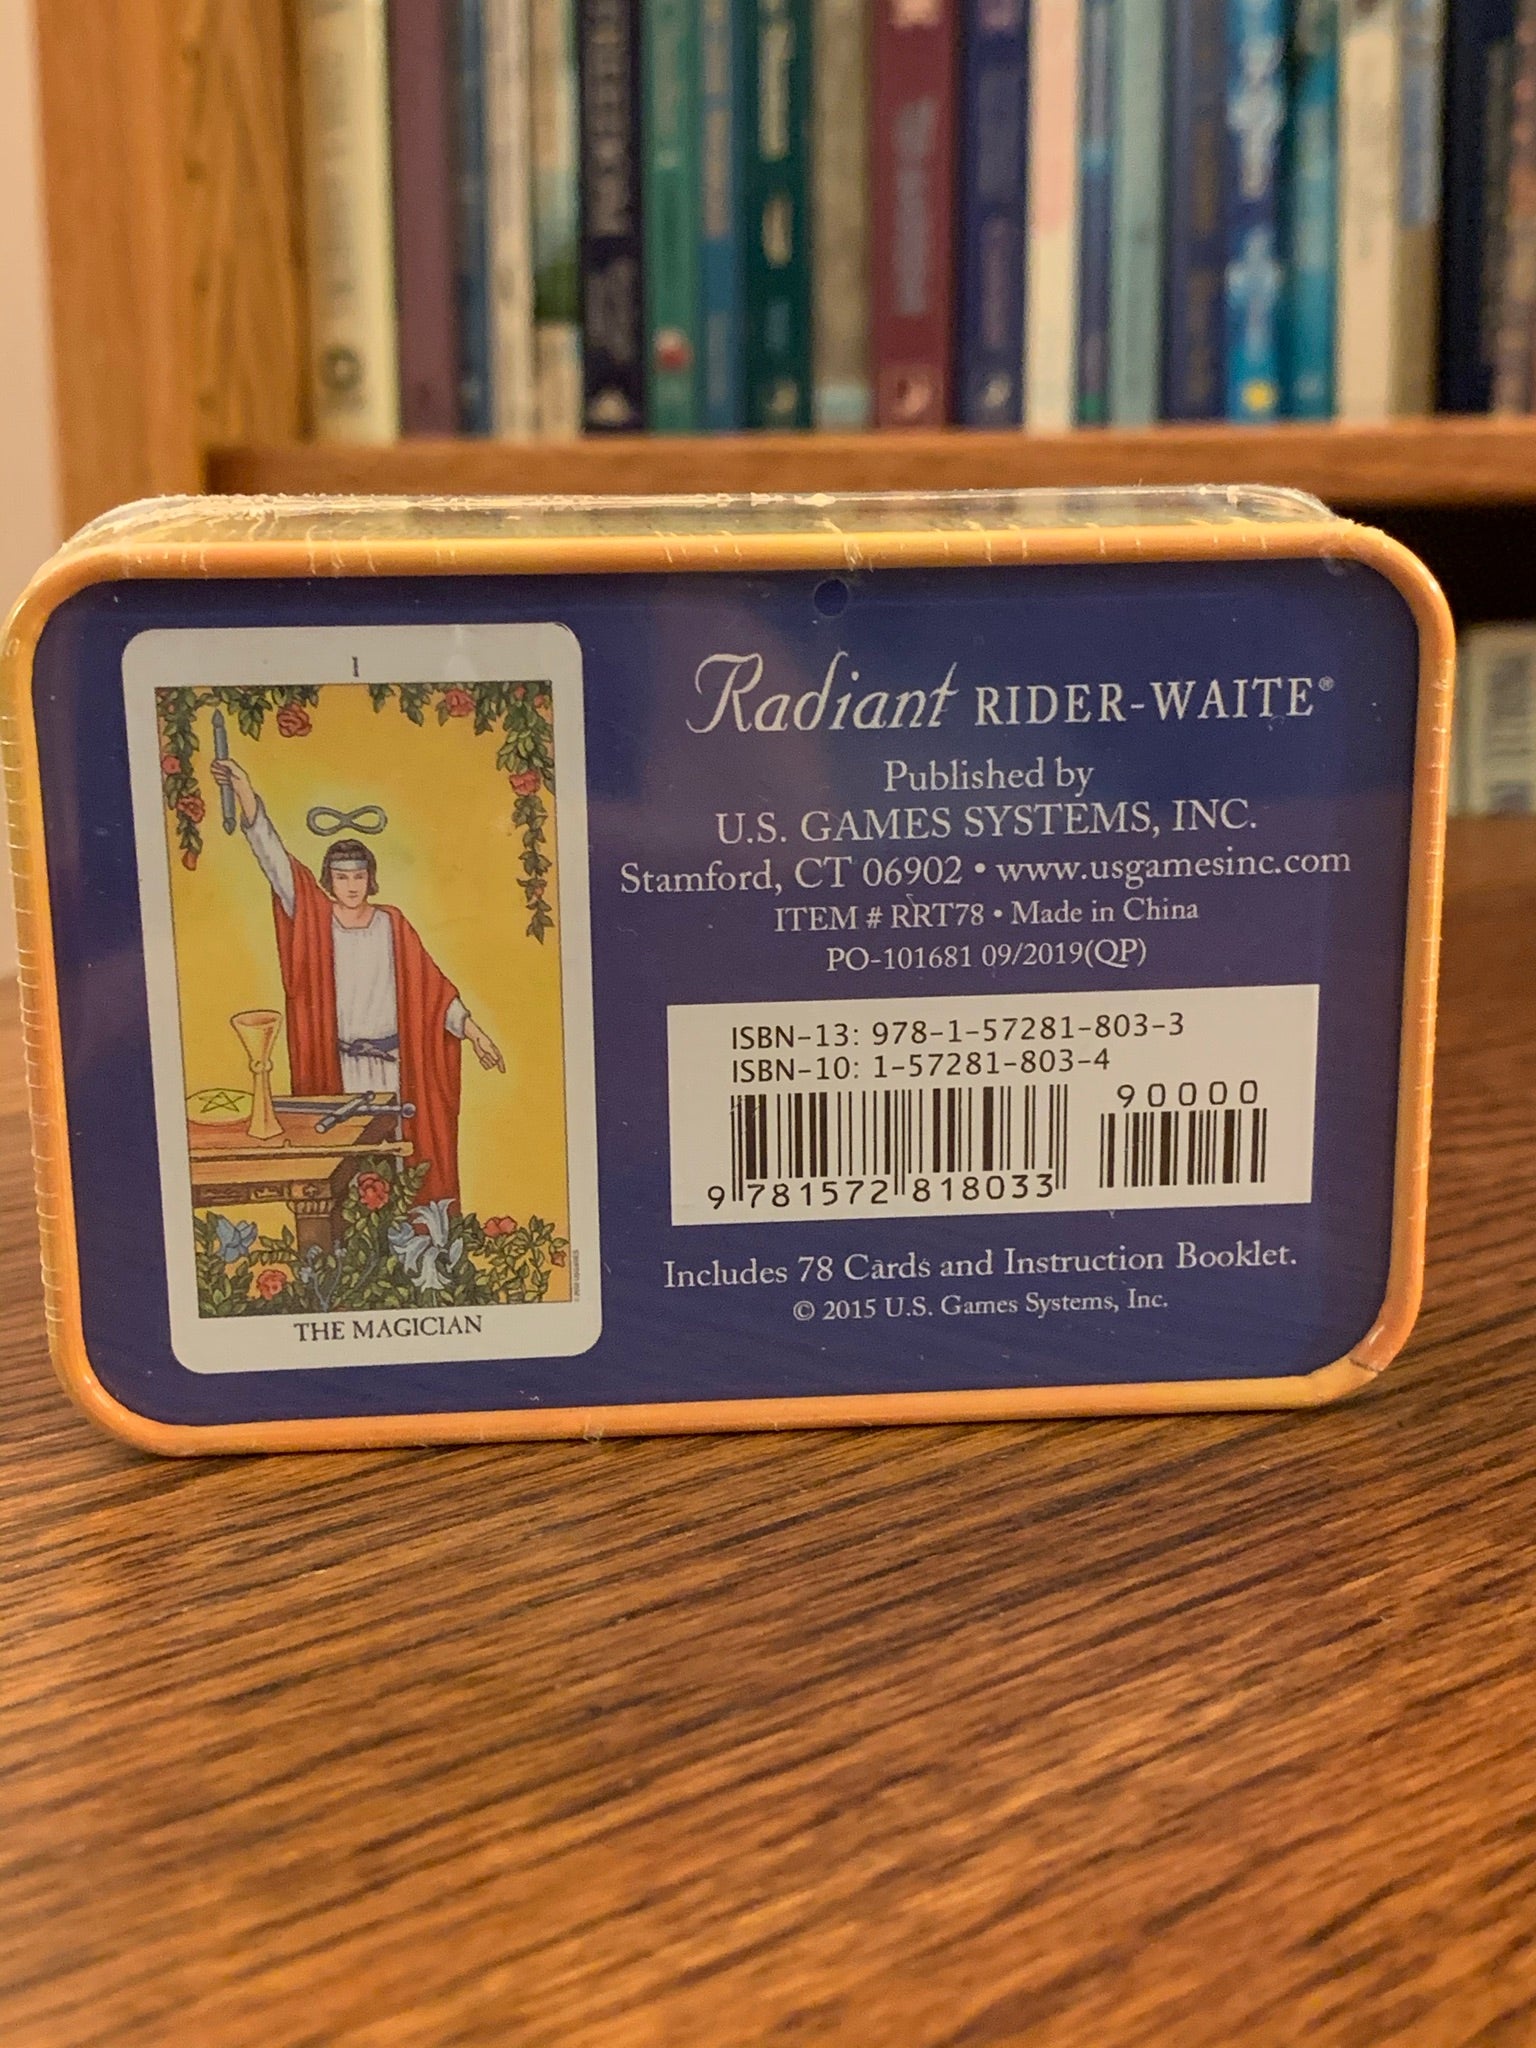 This Radiant Rider-Tarot Deck, takes the traditional illustrations up a notch with enhanced brightness and a lovely new card back, now illustrated with a deep blue, star-filled sky. If you like the traditional tarot, this is the deck for you. The set includes 78 cards, a guide booklet, and a tin for storage (instead of the regular cardboard box). Price is $18.95. This photo is of the back of the storage tin.